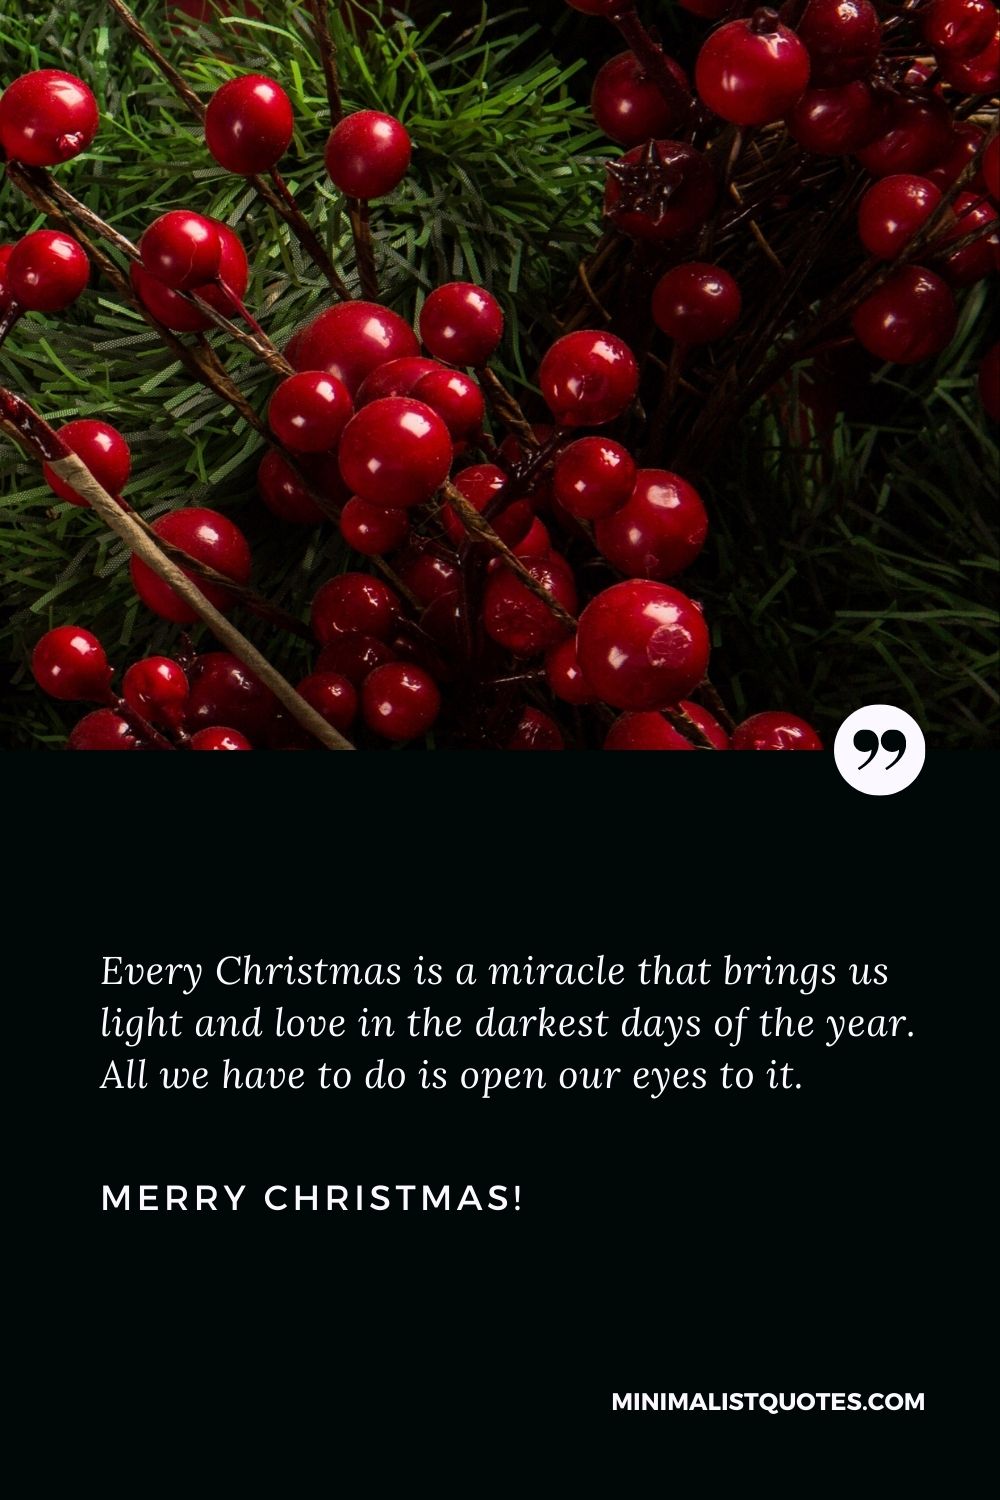 Every Christmas is a miracle that brings us light and love in the darkest days of the year. All we have to do is open our eyes to it. Merry Christmas!